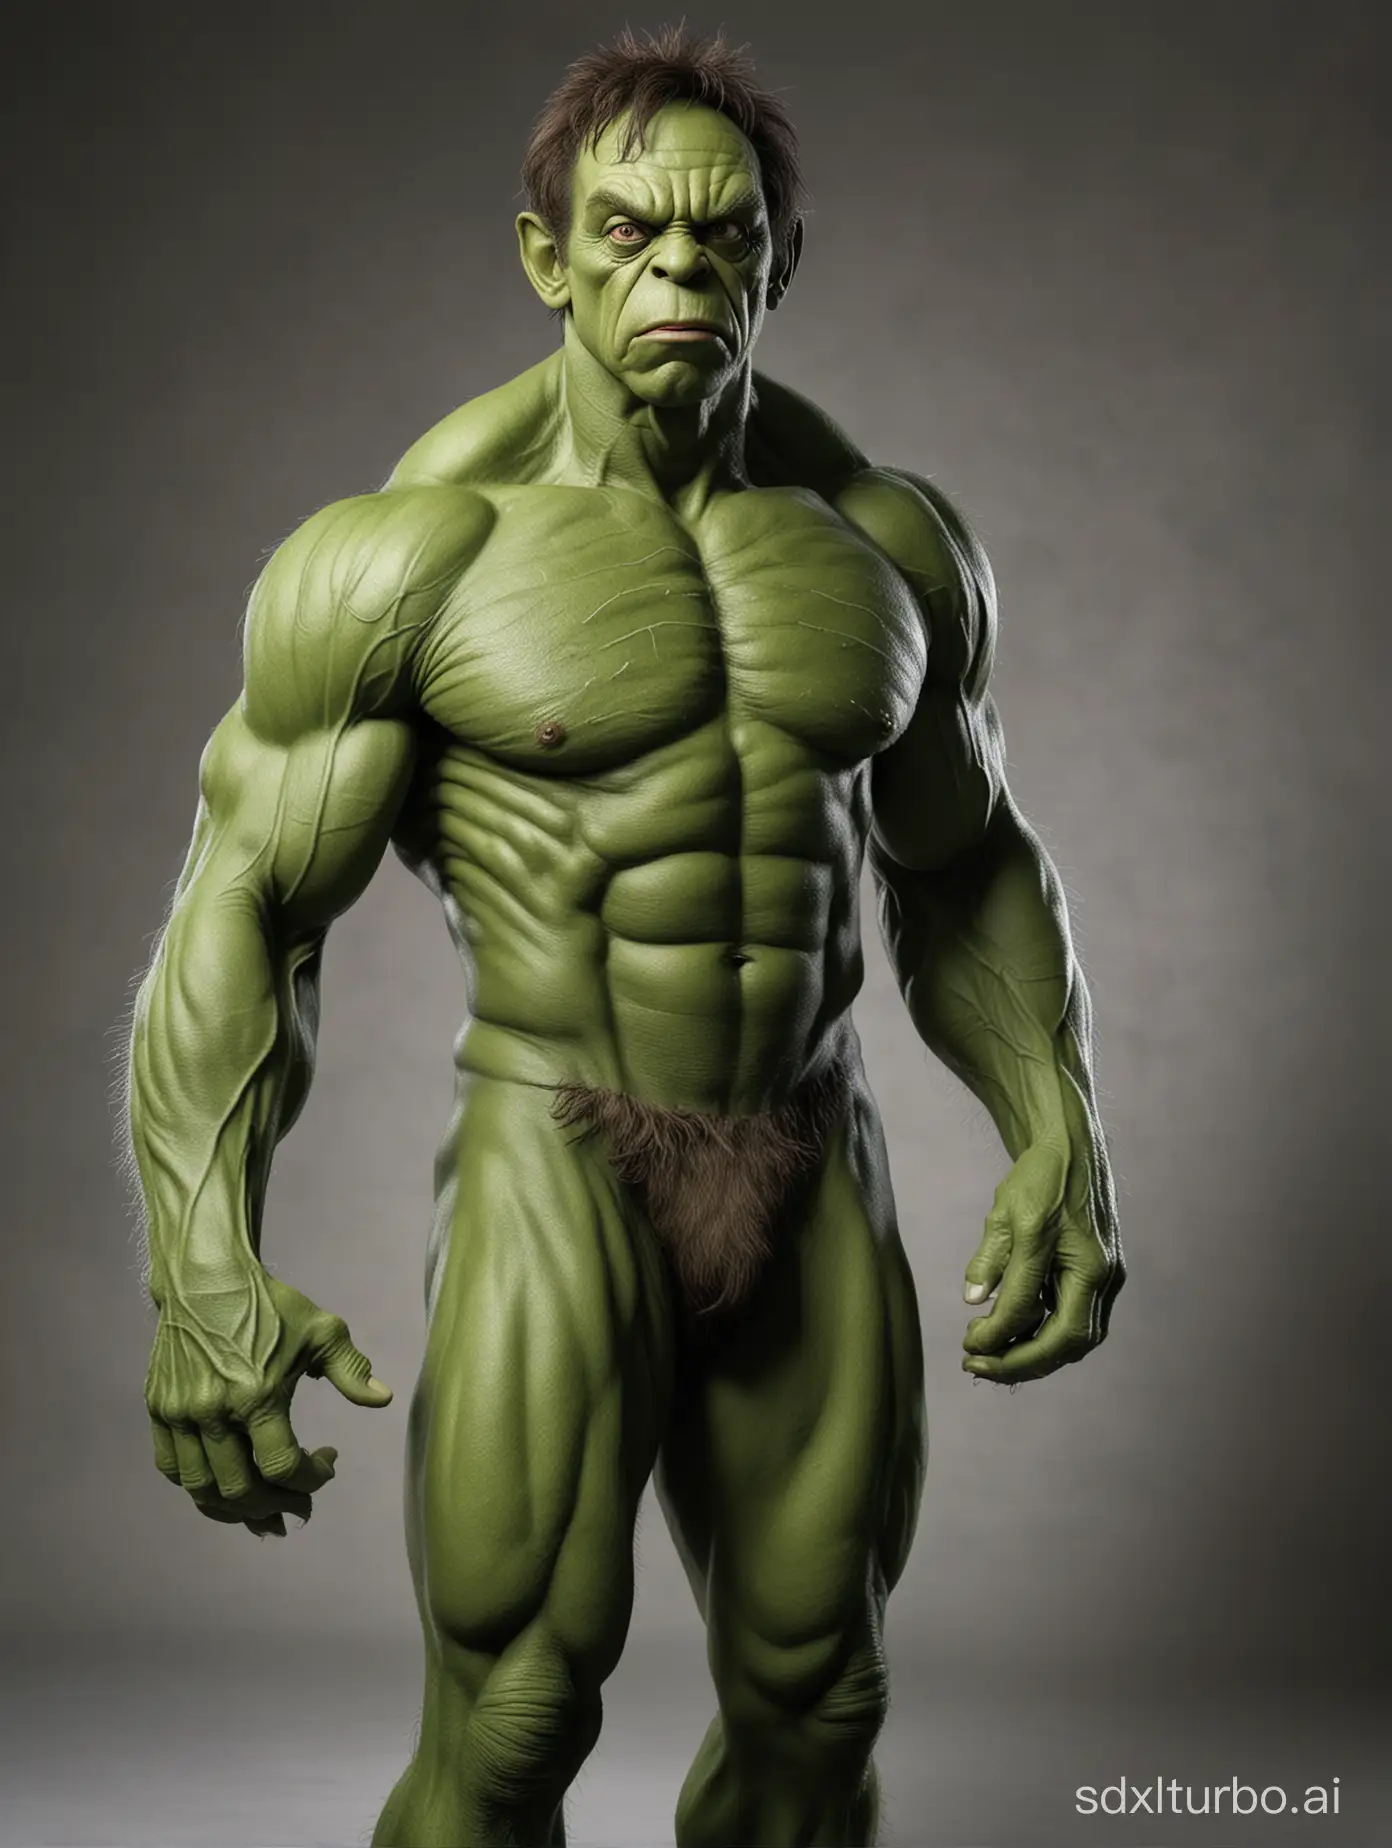 Actor Don Knotts Mr Furley as the Incredible Hulk
Full body portrait shot Extremely photo realistic high resolution imaging.